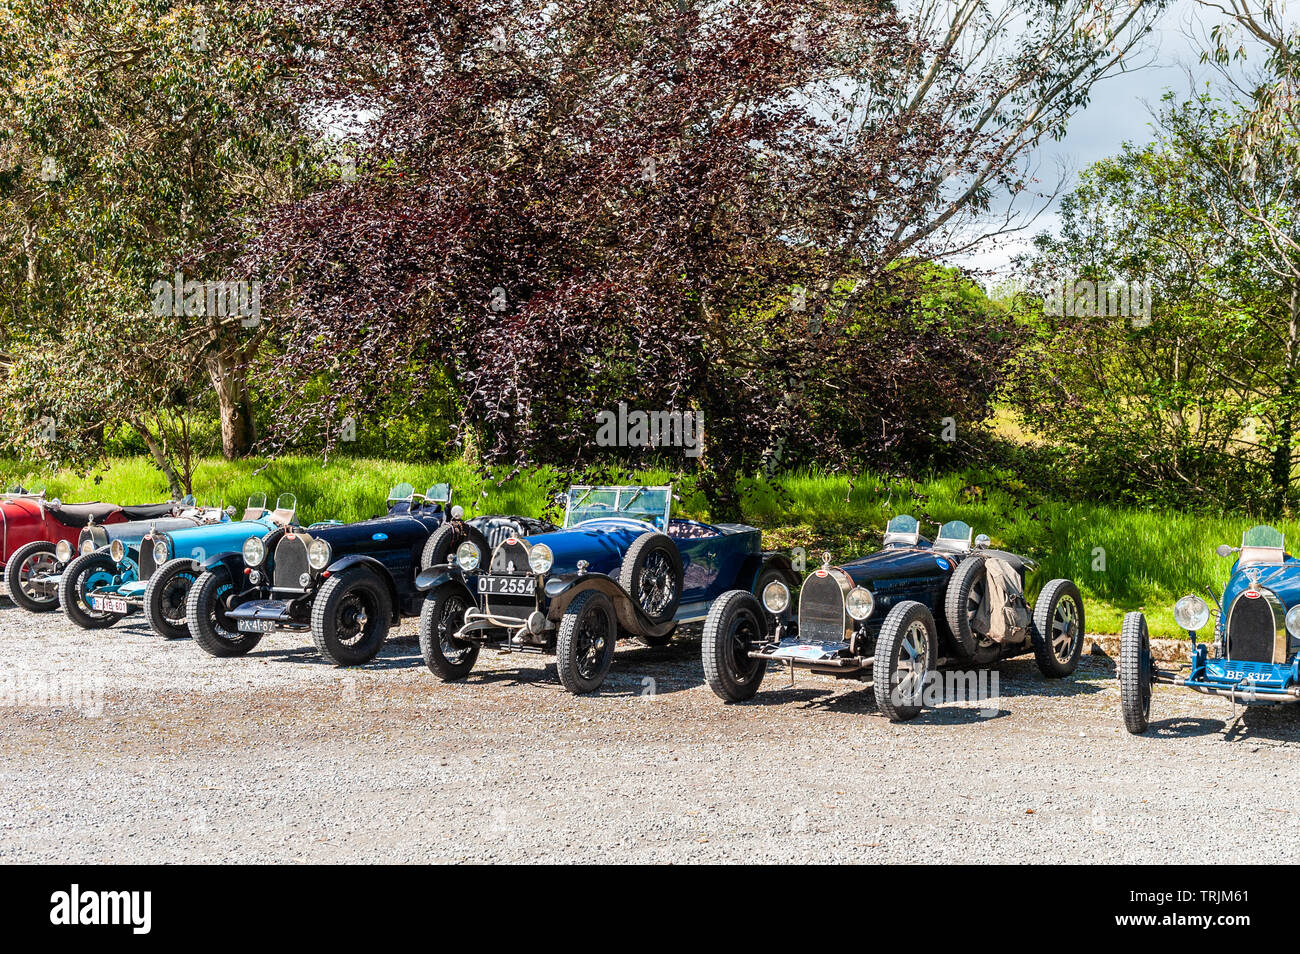 Bantry, West Cork, Ireland. 6th Juine, 2019. The Bugatti Owners Club is in Ireland this week for its annual international rally, featuring 100 vintage Bugatti's. After lunch in the West Lodge Hotel, the cars headed for the Mizen Head. Bugattis were lined up at Bantry House & Gardens. Credit: Andy Gibson/Alamy Live News.. Stock Photo